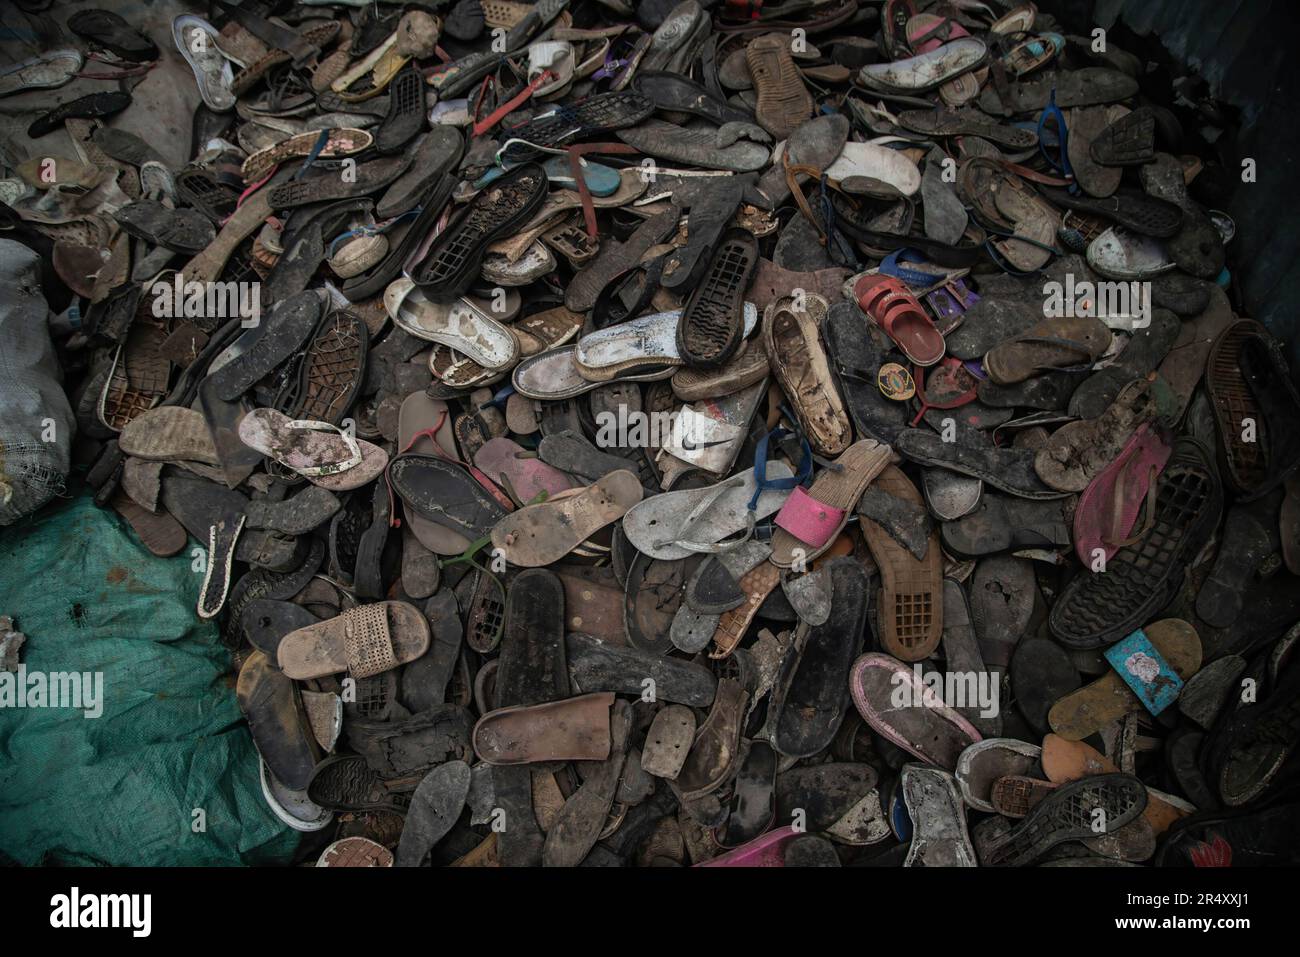 May 30, 2023, Nakuru, Kenya: A pile of shoe waste at a plastic recycling plant in Nakuru. Negotiators have gathered in Paris, France for the second round of deliberations to develop a global treaty aimed at tackling the escalating issue of plastic pollution. According to a recent report by the United Nations Environment Programme (UNEP), countries have the potential to reduce plastic pollution by 80% by 2040 by eliminating unnecessary plastics, implementing recycling and reuse strategies, introducing deposit return schemes, and substituting plastic with sustainable alternative materials. (Cred Stock Photo